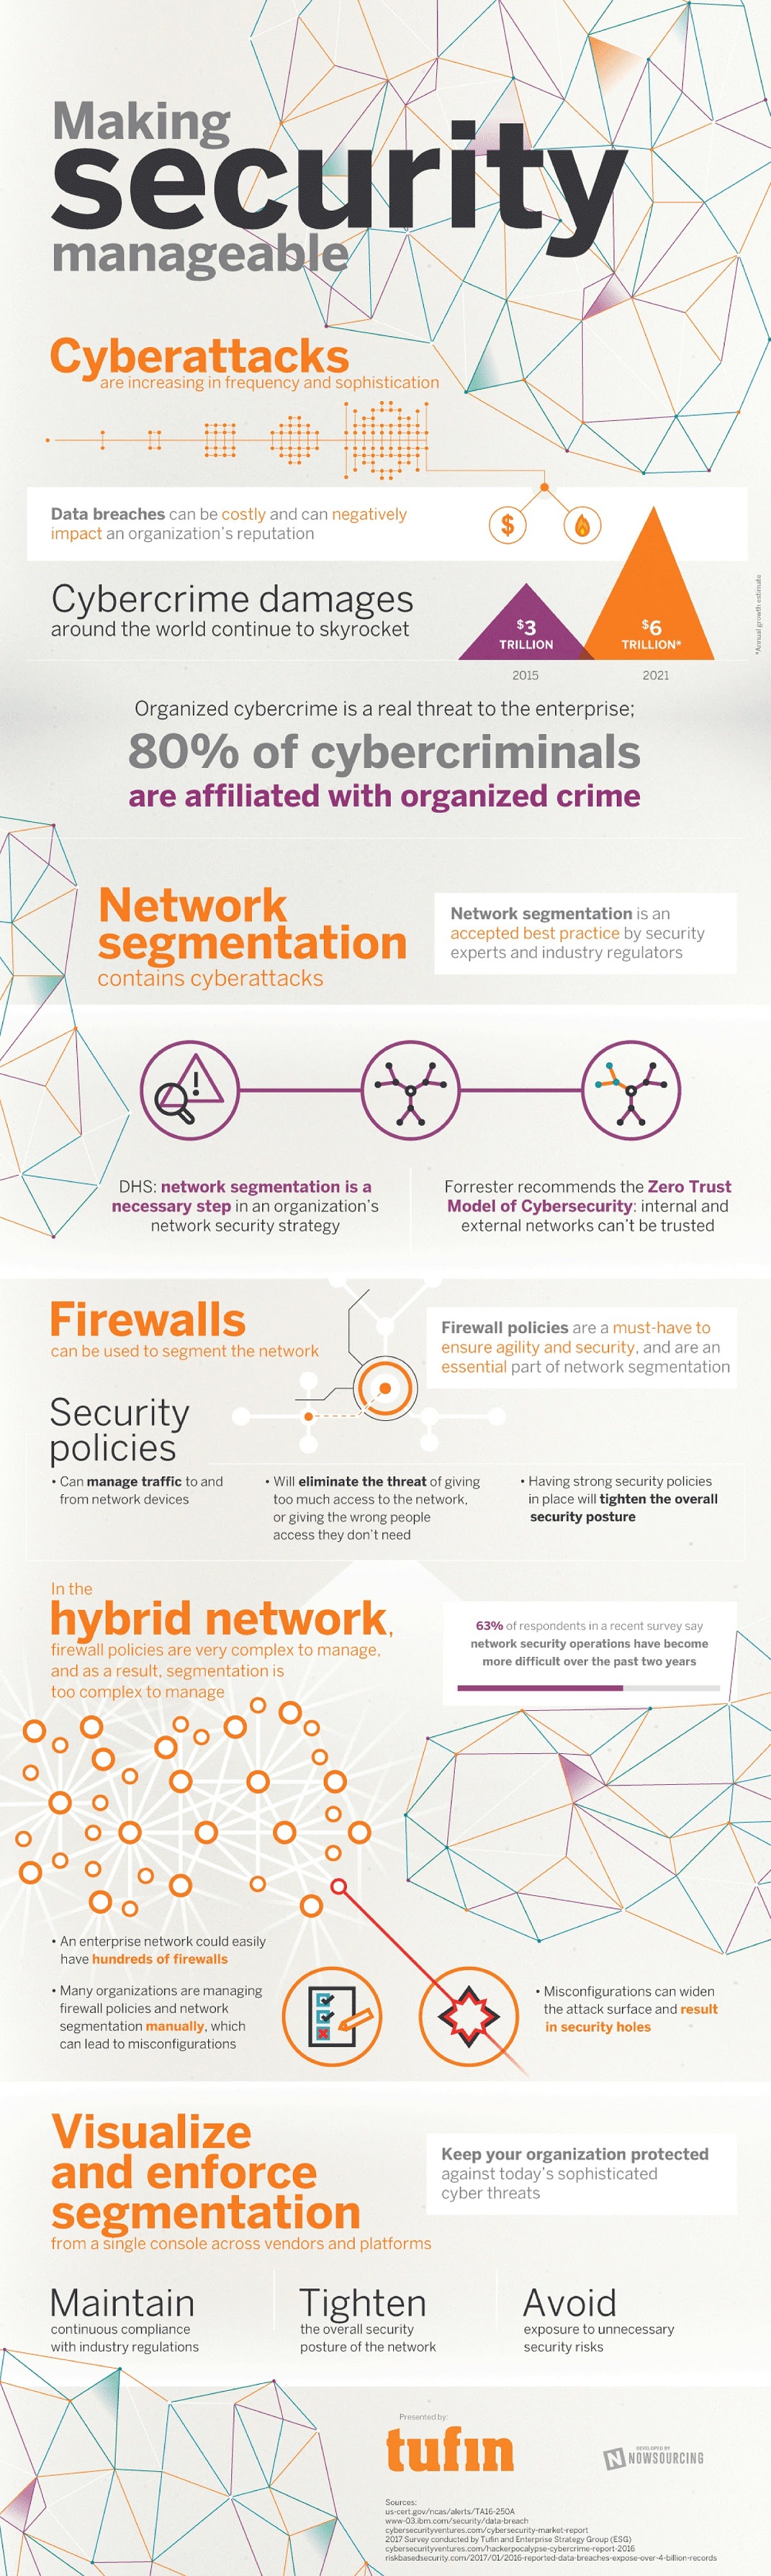 Cybersecurity: Making Security Manageable #infographic